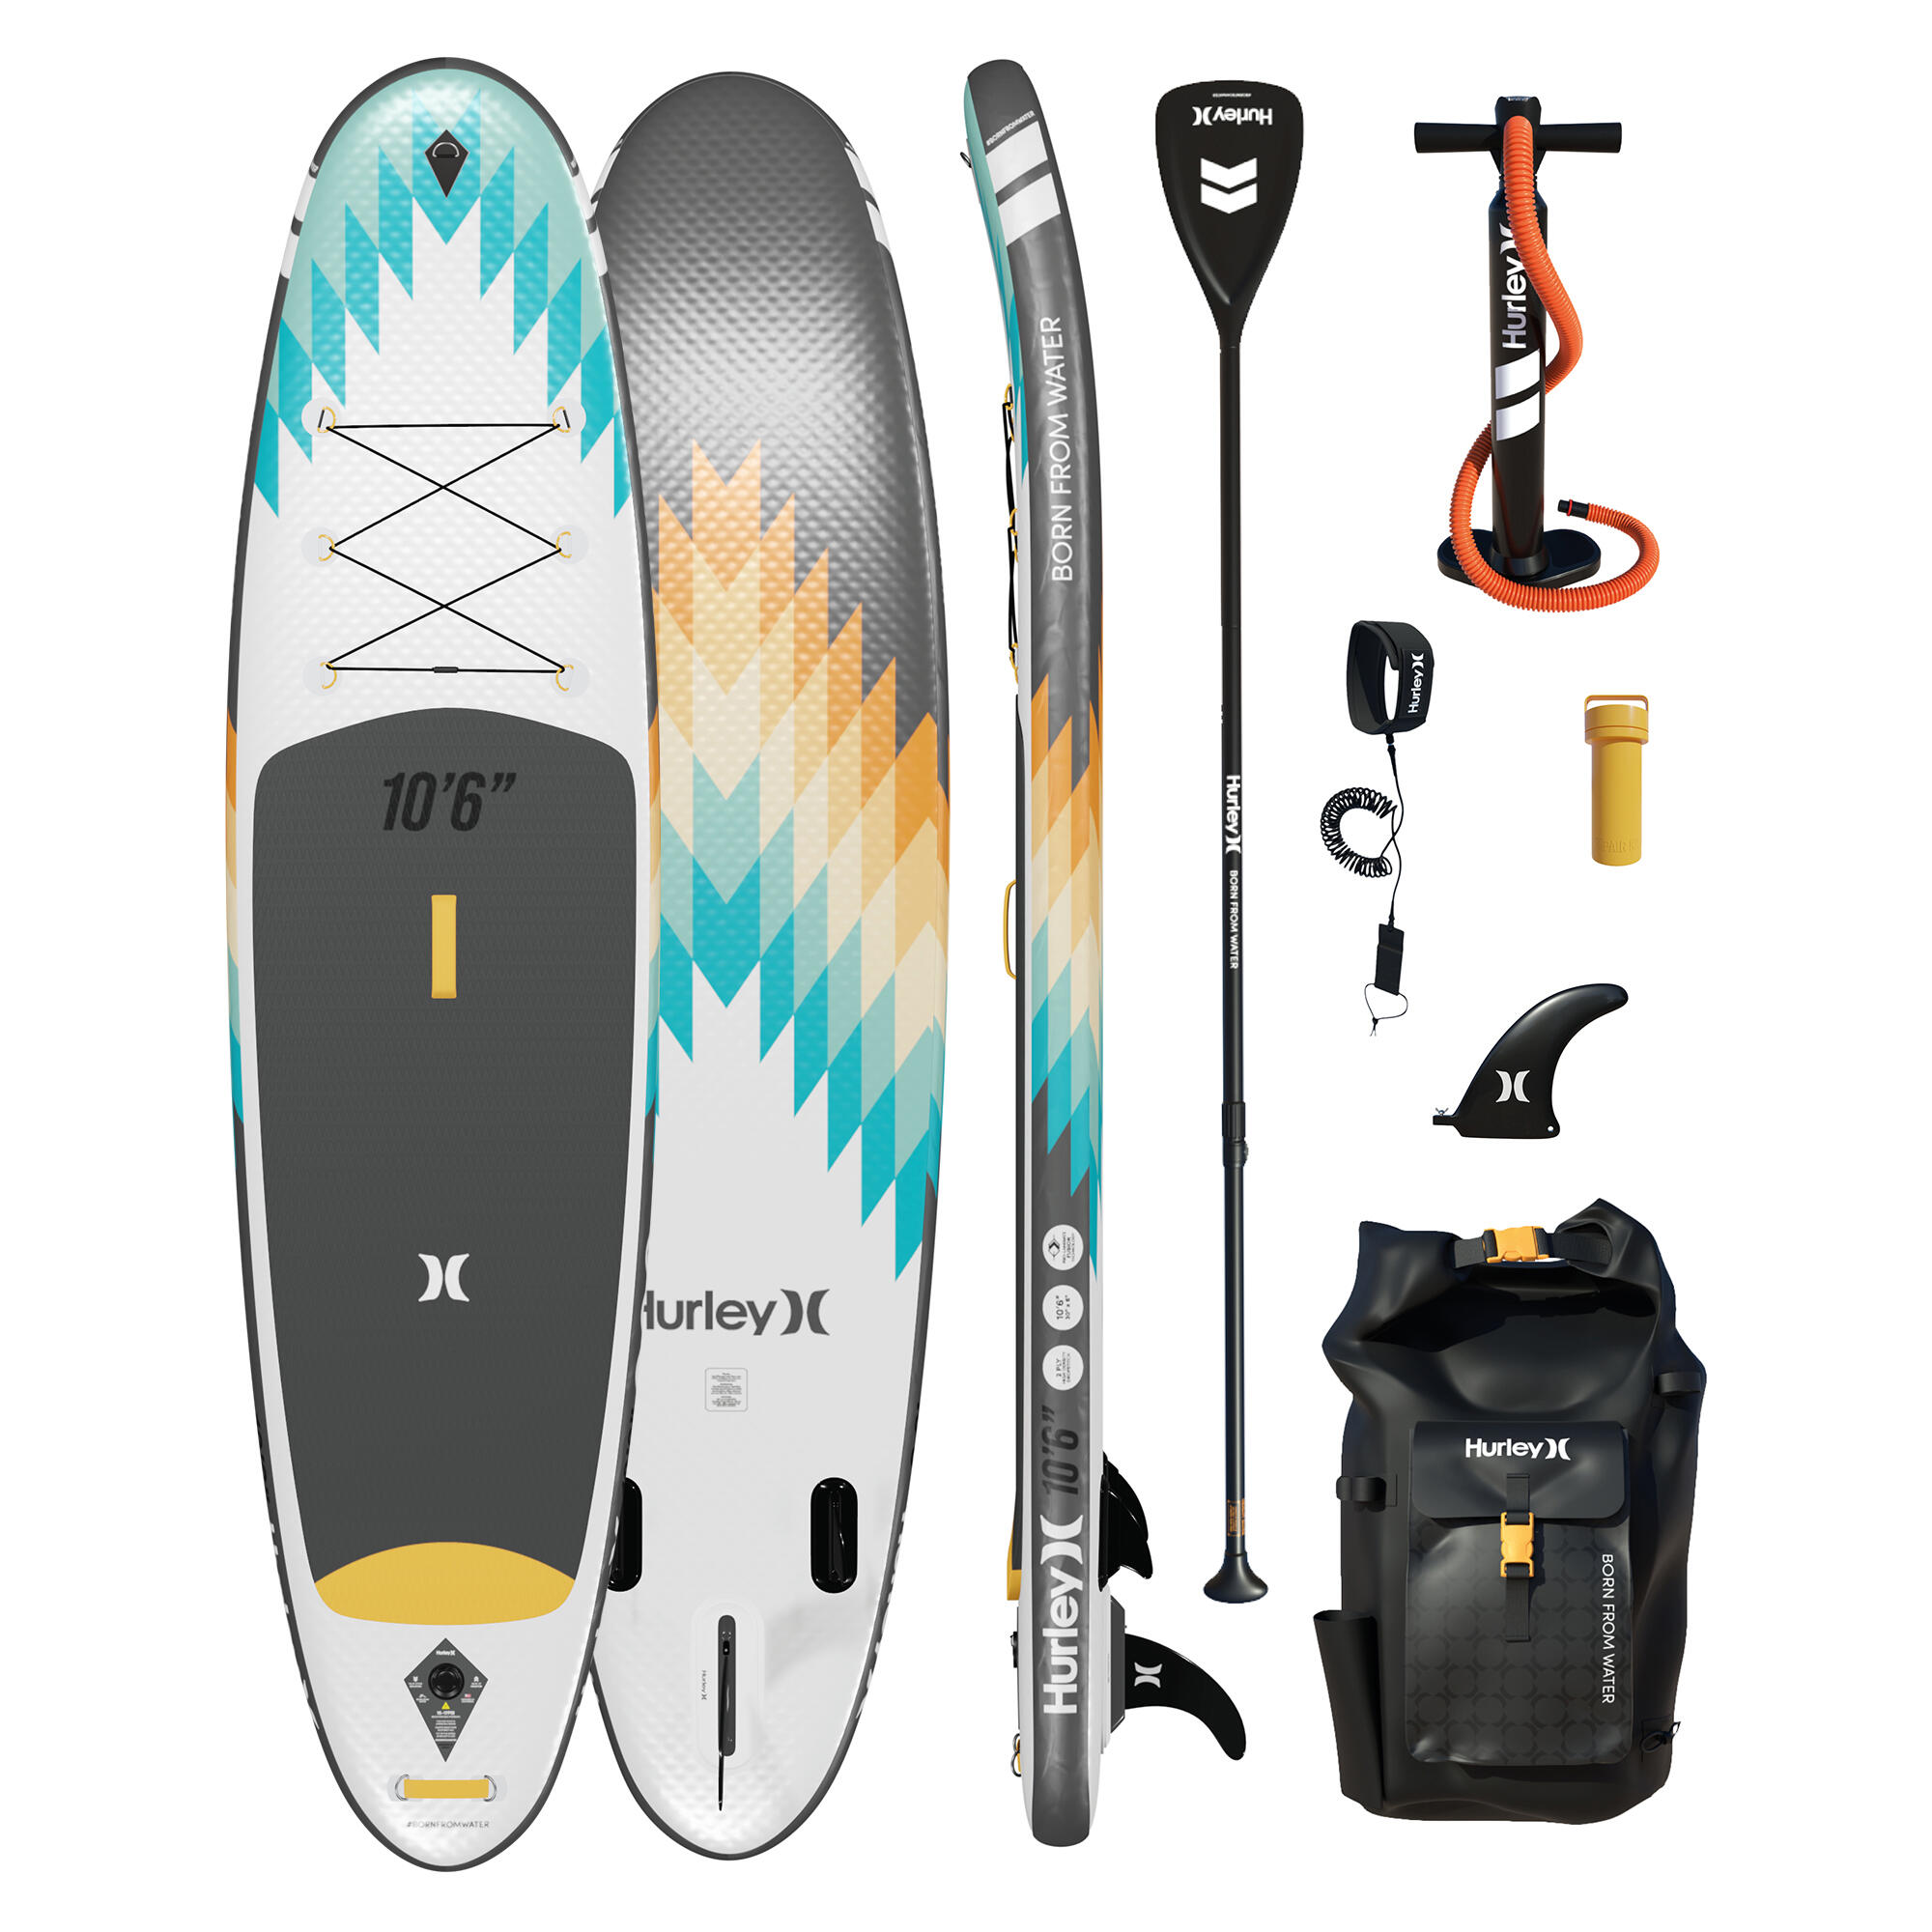 Hurley Advantage OUTSIDER 10'6 Inflatable Paddle Board Package 1/6